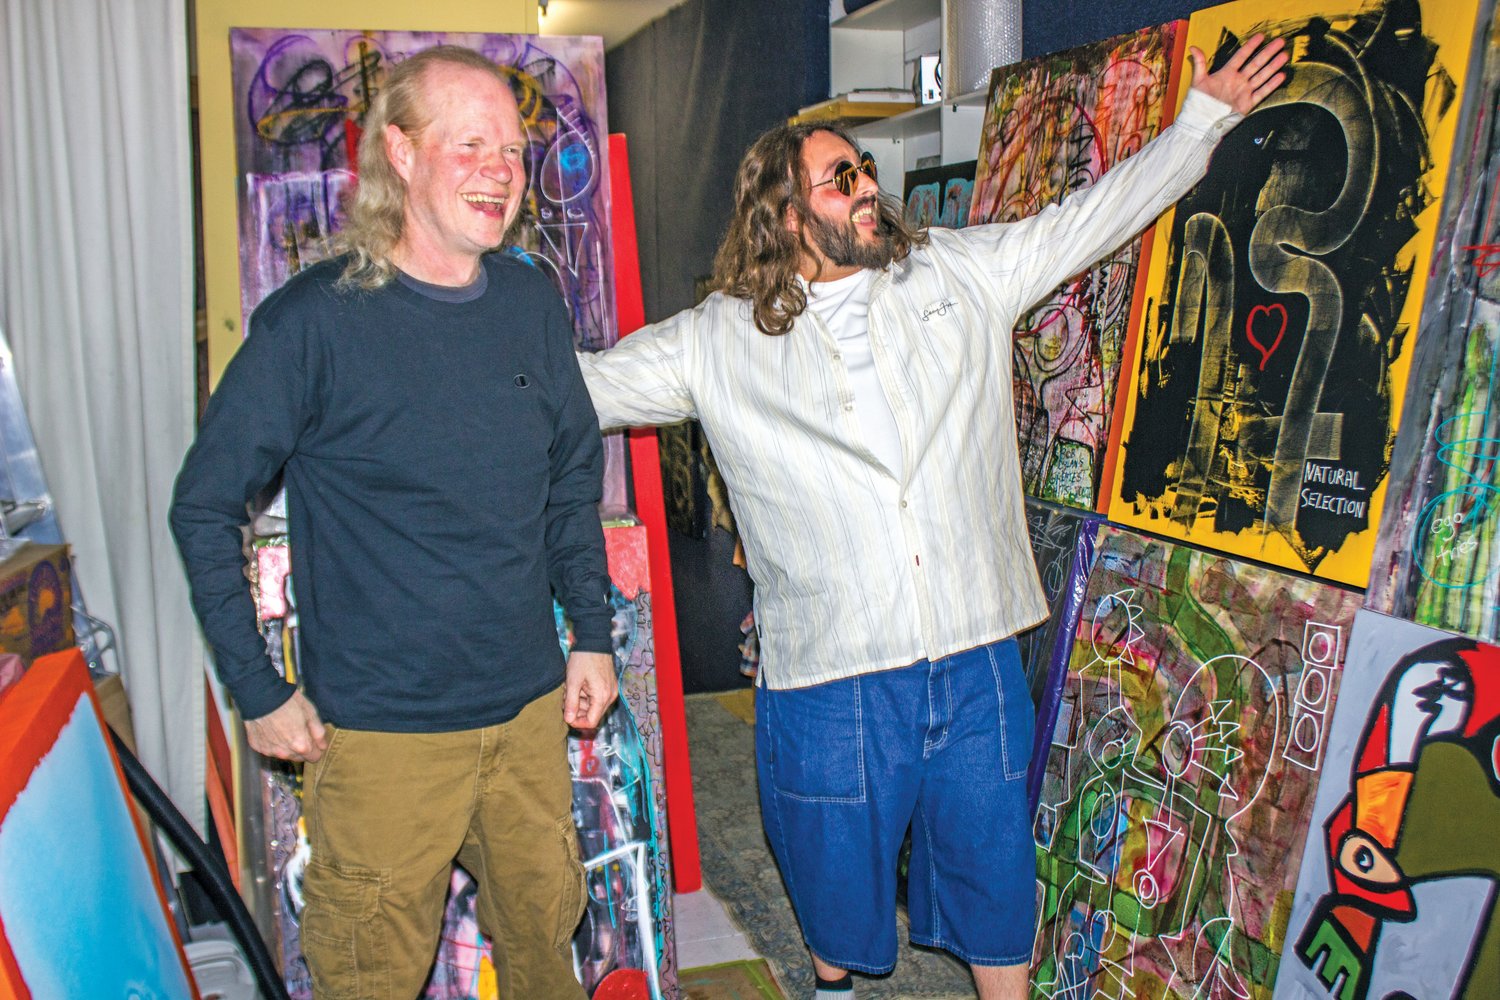 Painter Milo Redwood, left, and hip hop performer/producer Wyeth “B” Barclay, are crossing the generational streams to introduce Milo’s contemporary art to the world.